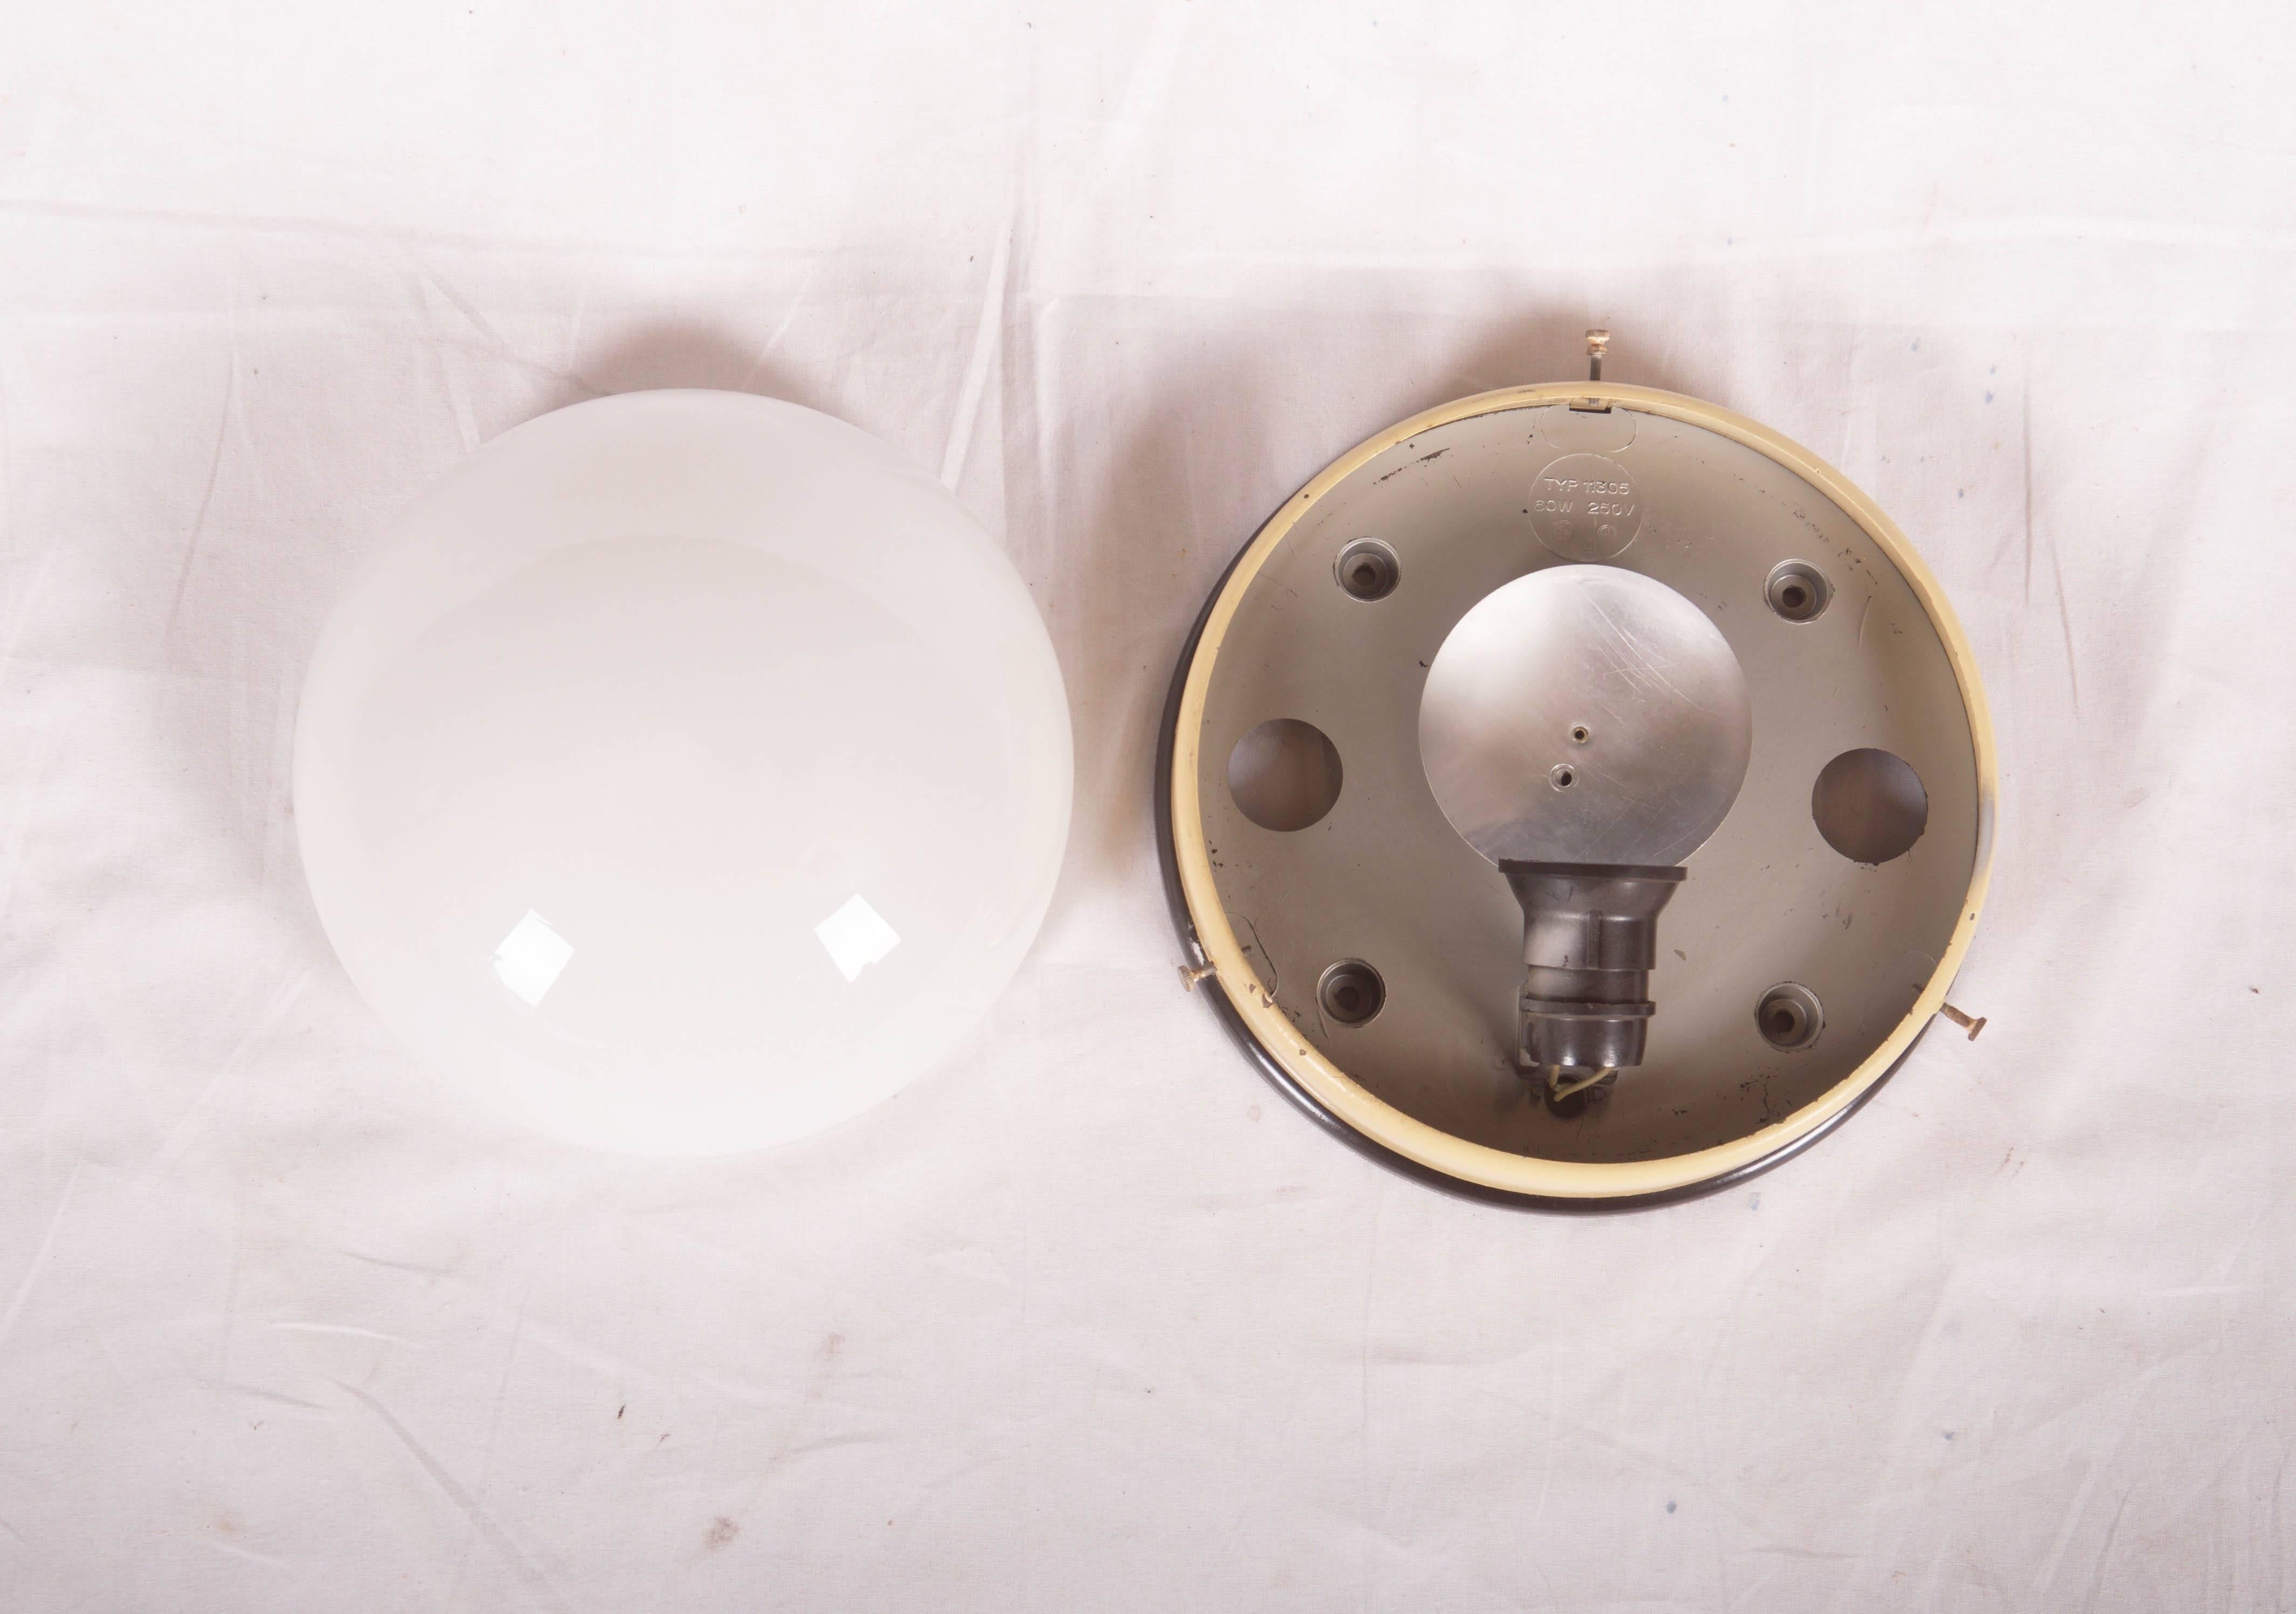 Czech Bauhaus Bakelite Wall or Ceiling Industrial Lamp from 1940s For Sale